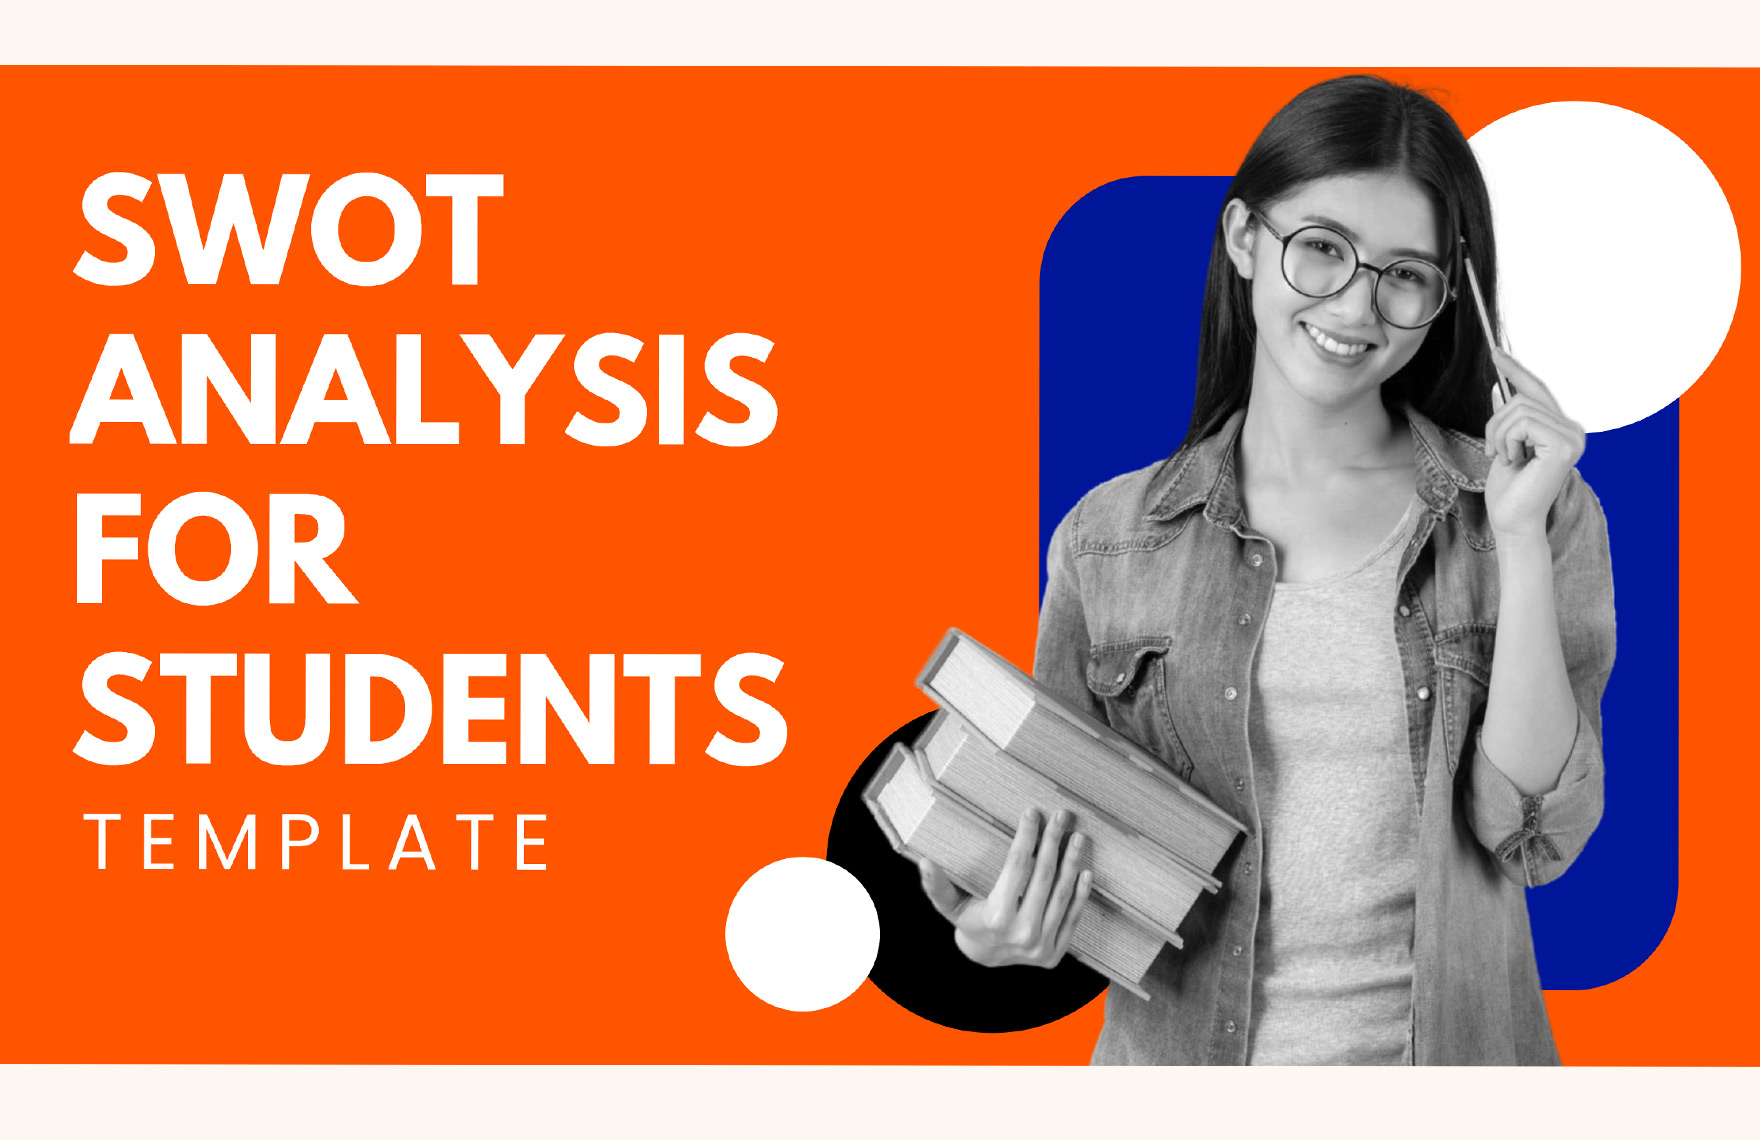 SWOT Analysis for Students Template